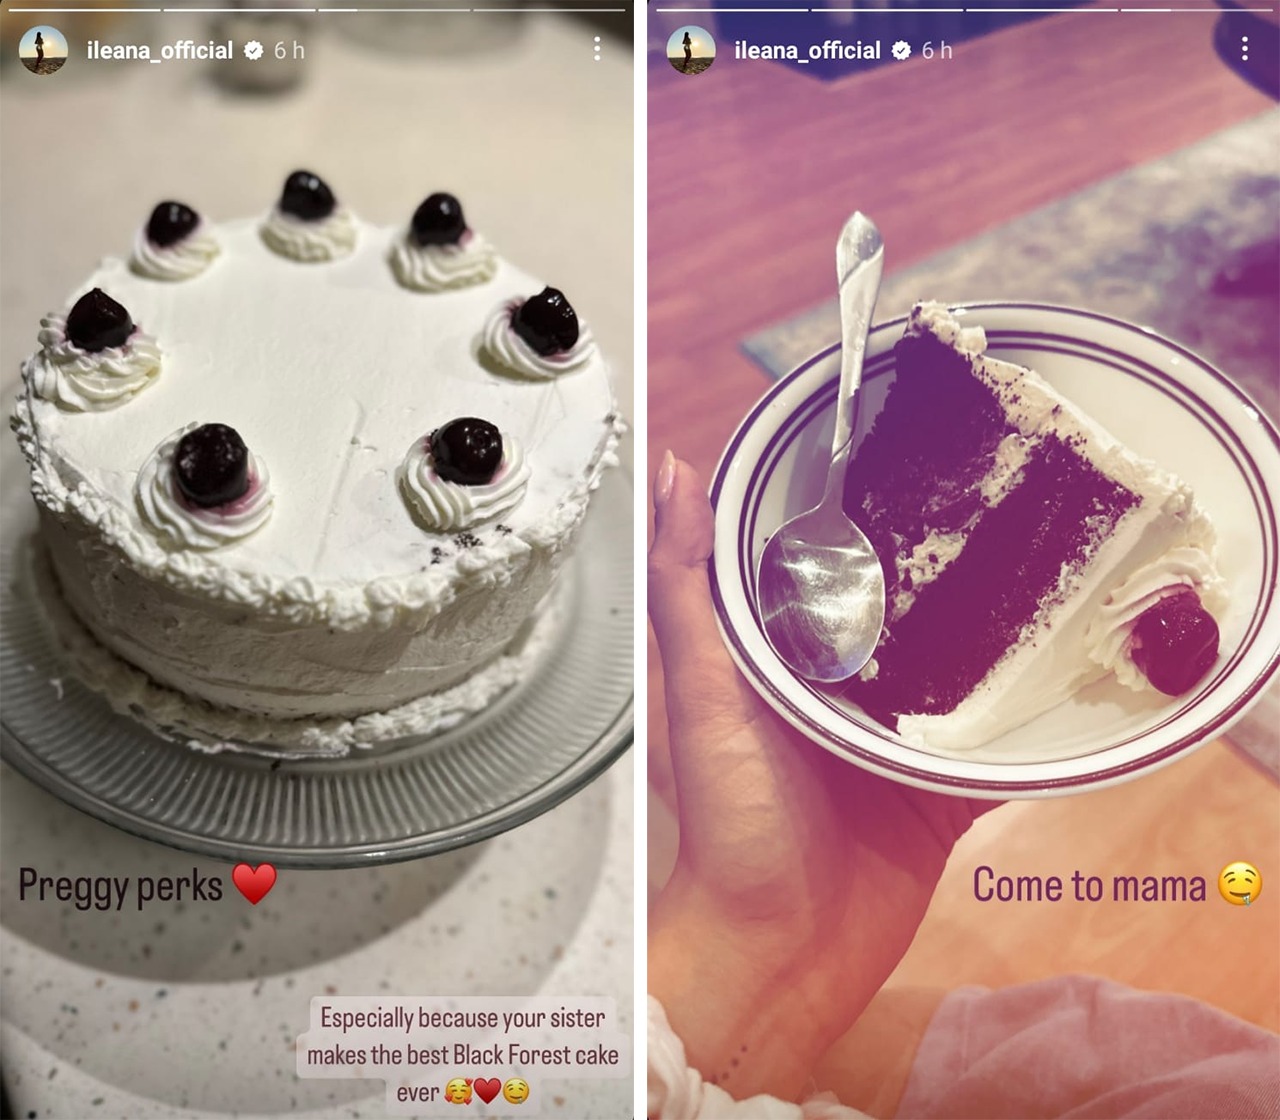 Mother-to-be Ileana D'Cruz shares her pregnancy foodie adventures;  Savor Sister's Black Forest Cake